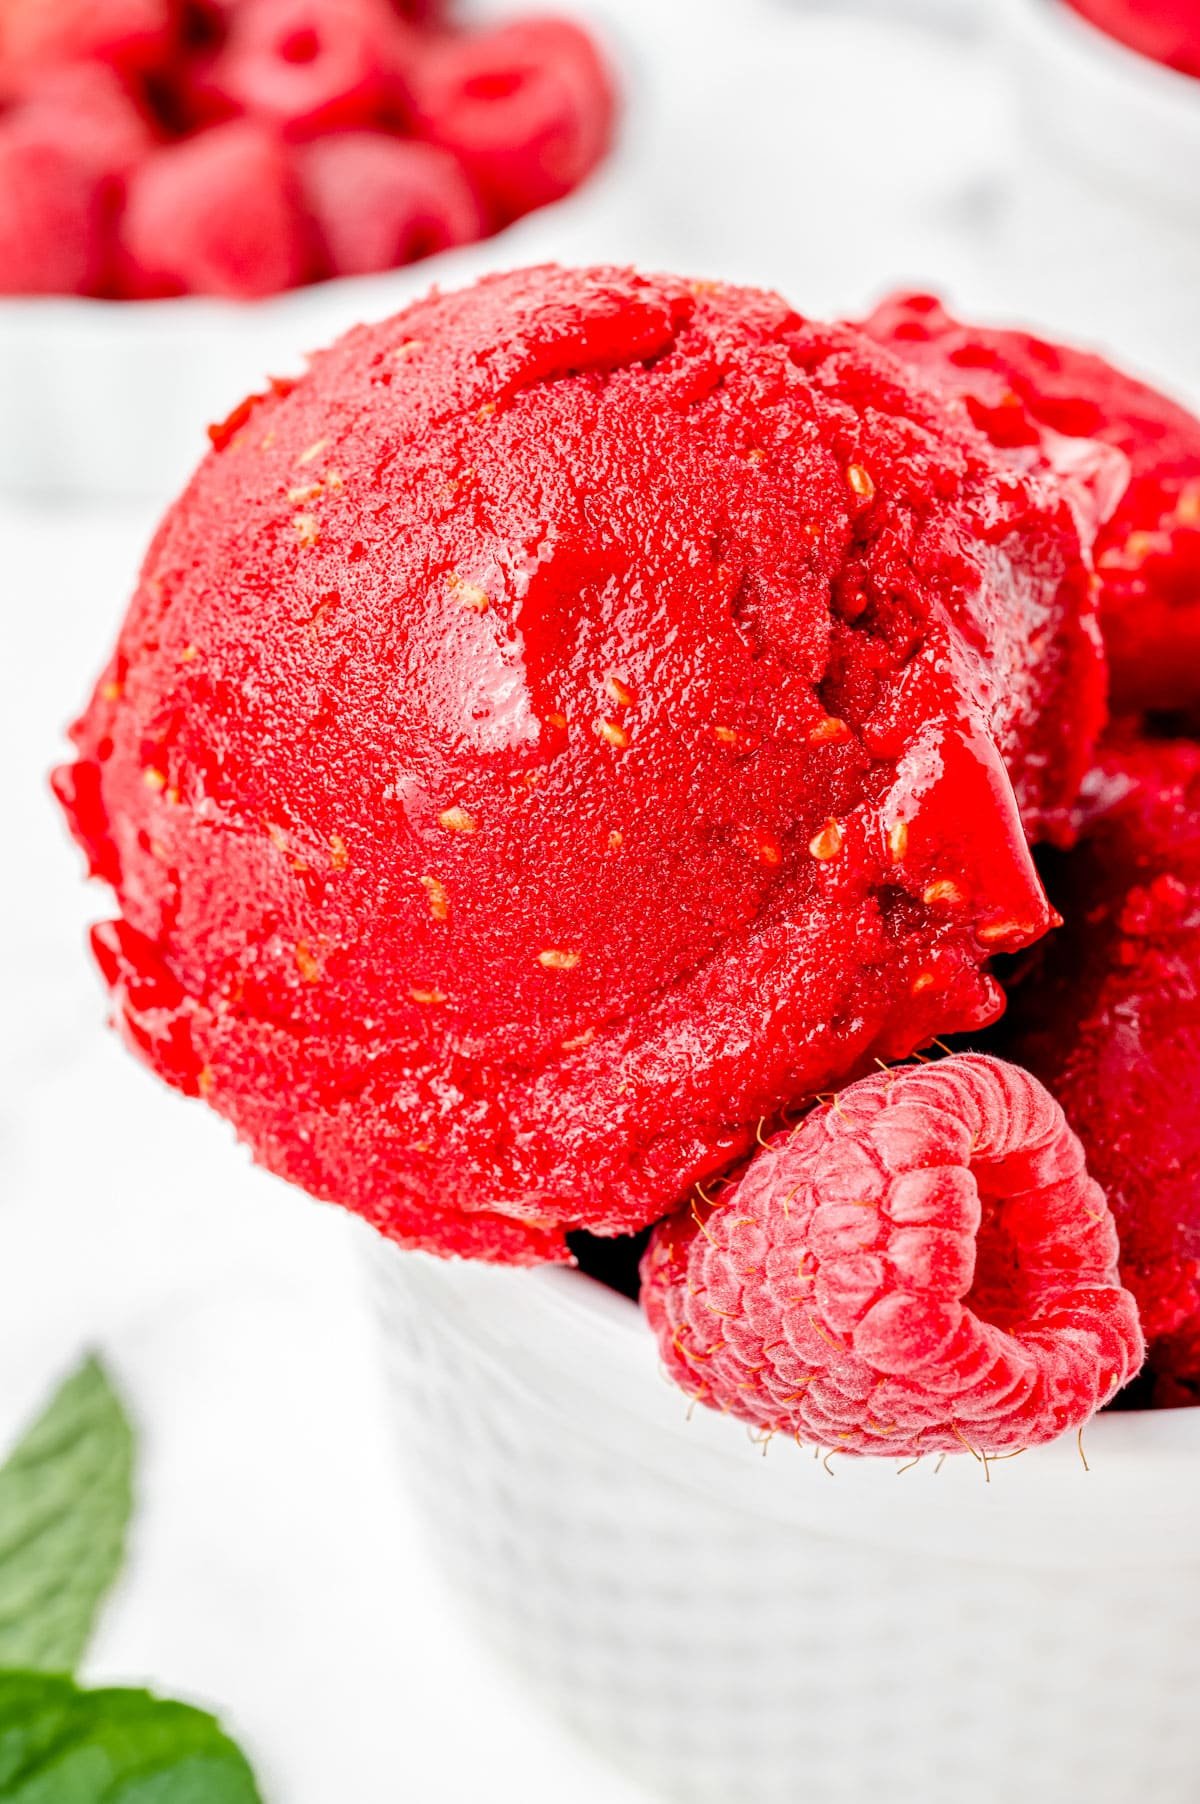 A close up picture of a scoop of Raspberry Sorbet.